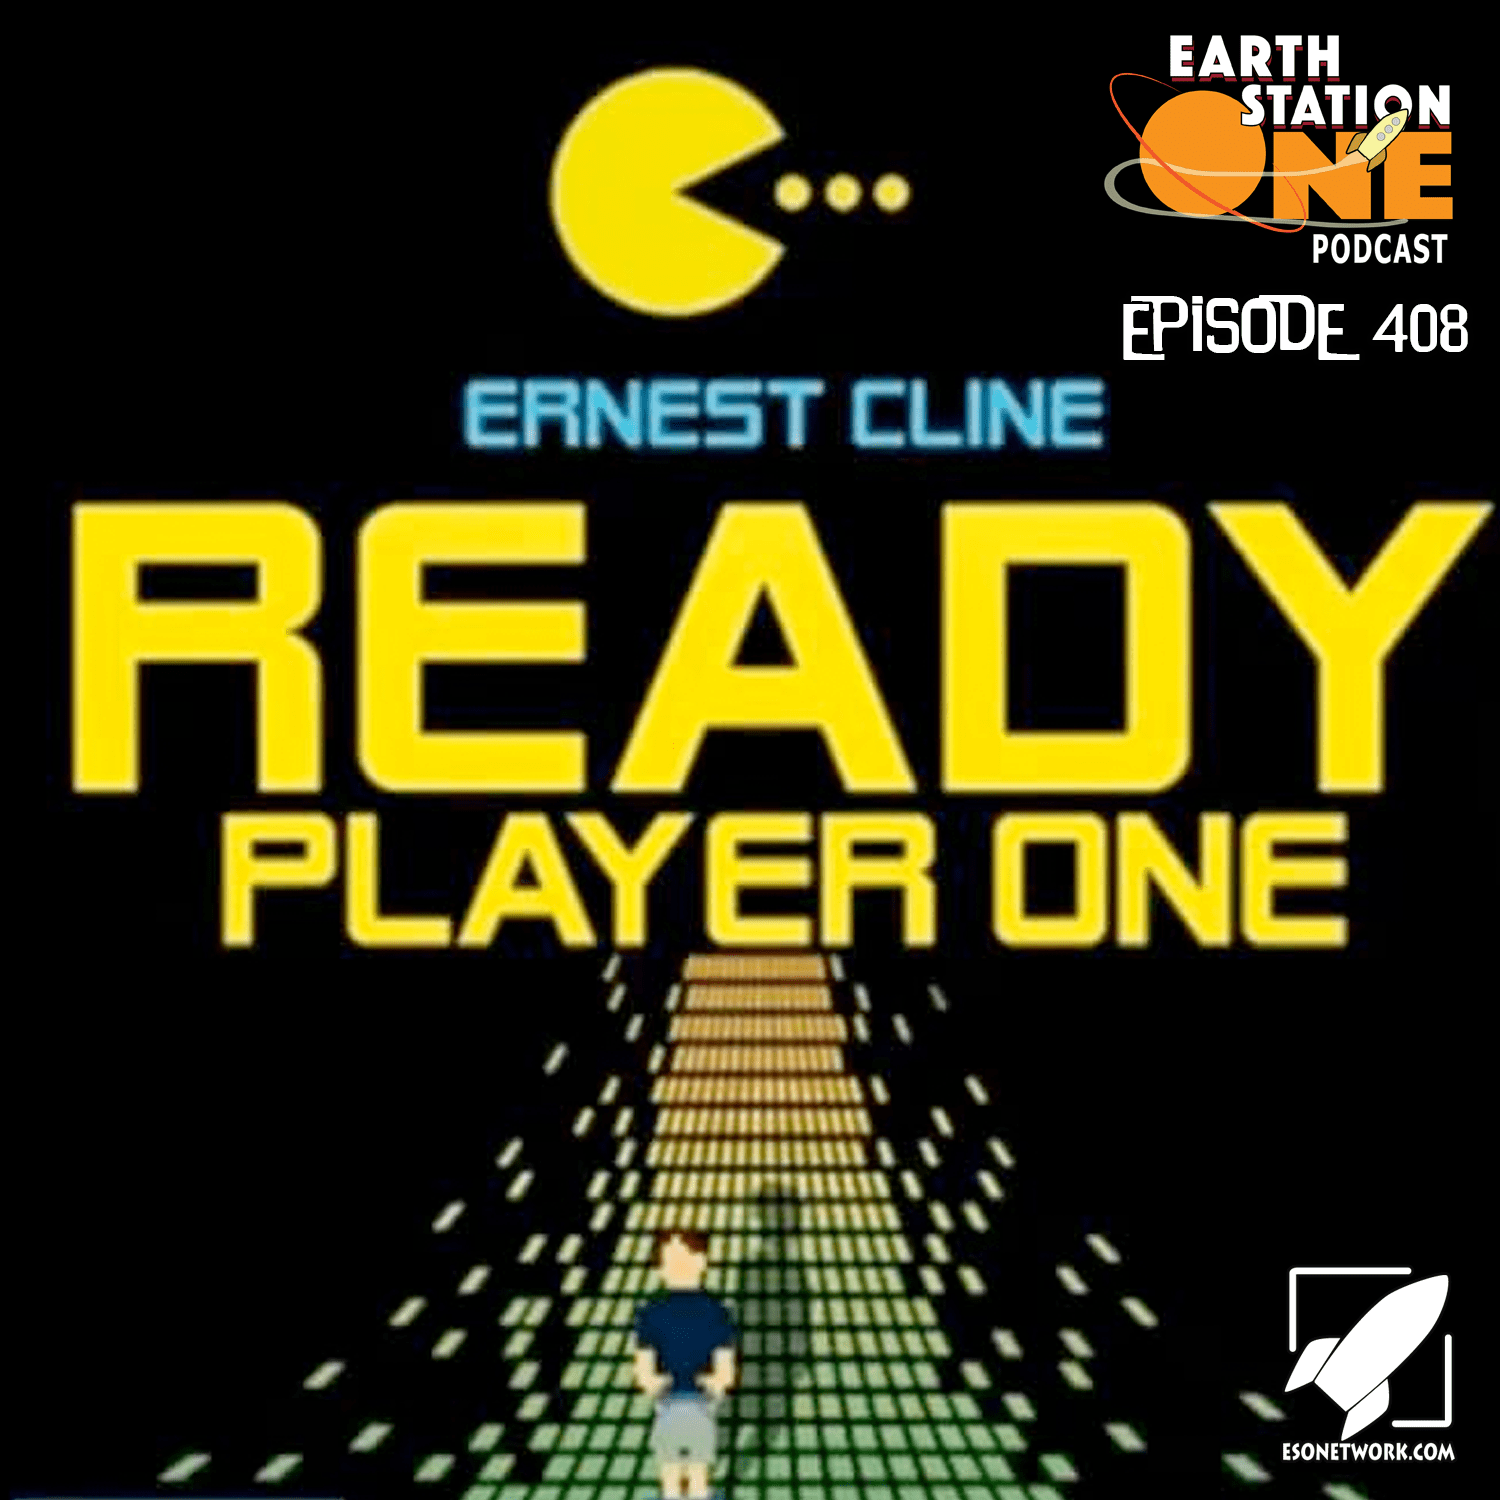 Earth Station One Podcast Ep 408